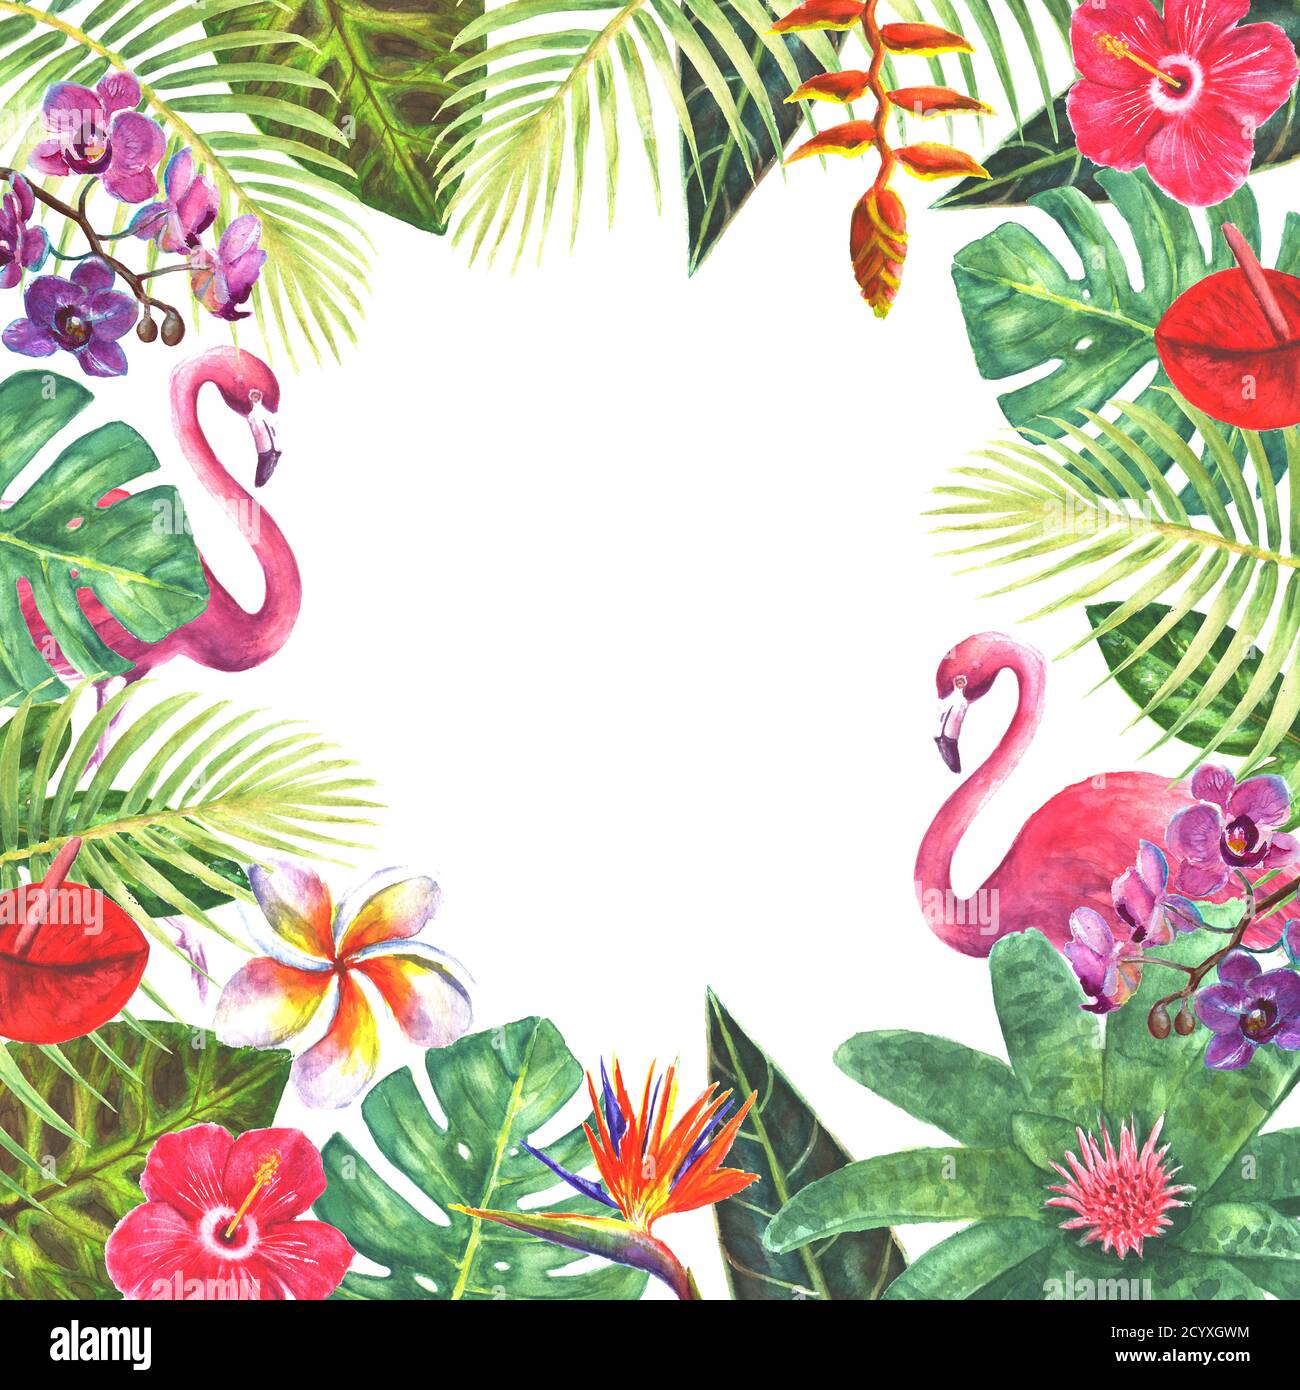 Pink flamingo birds exotic tropical jungle rain forest bright green plants flowers border frame template on white background. Watercolor hand drawn na Stock Photo